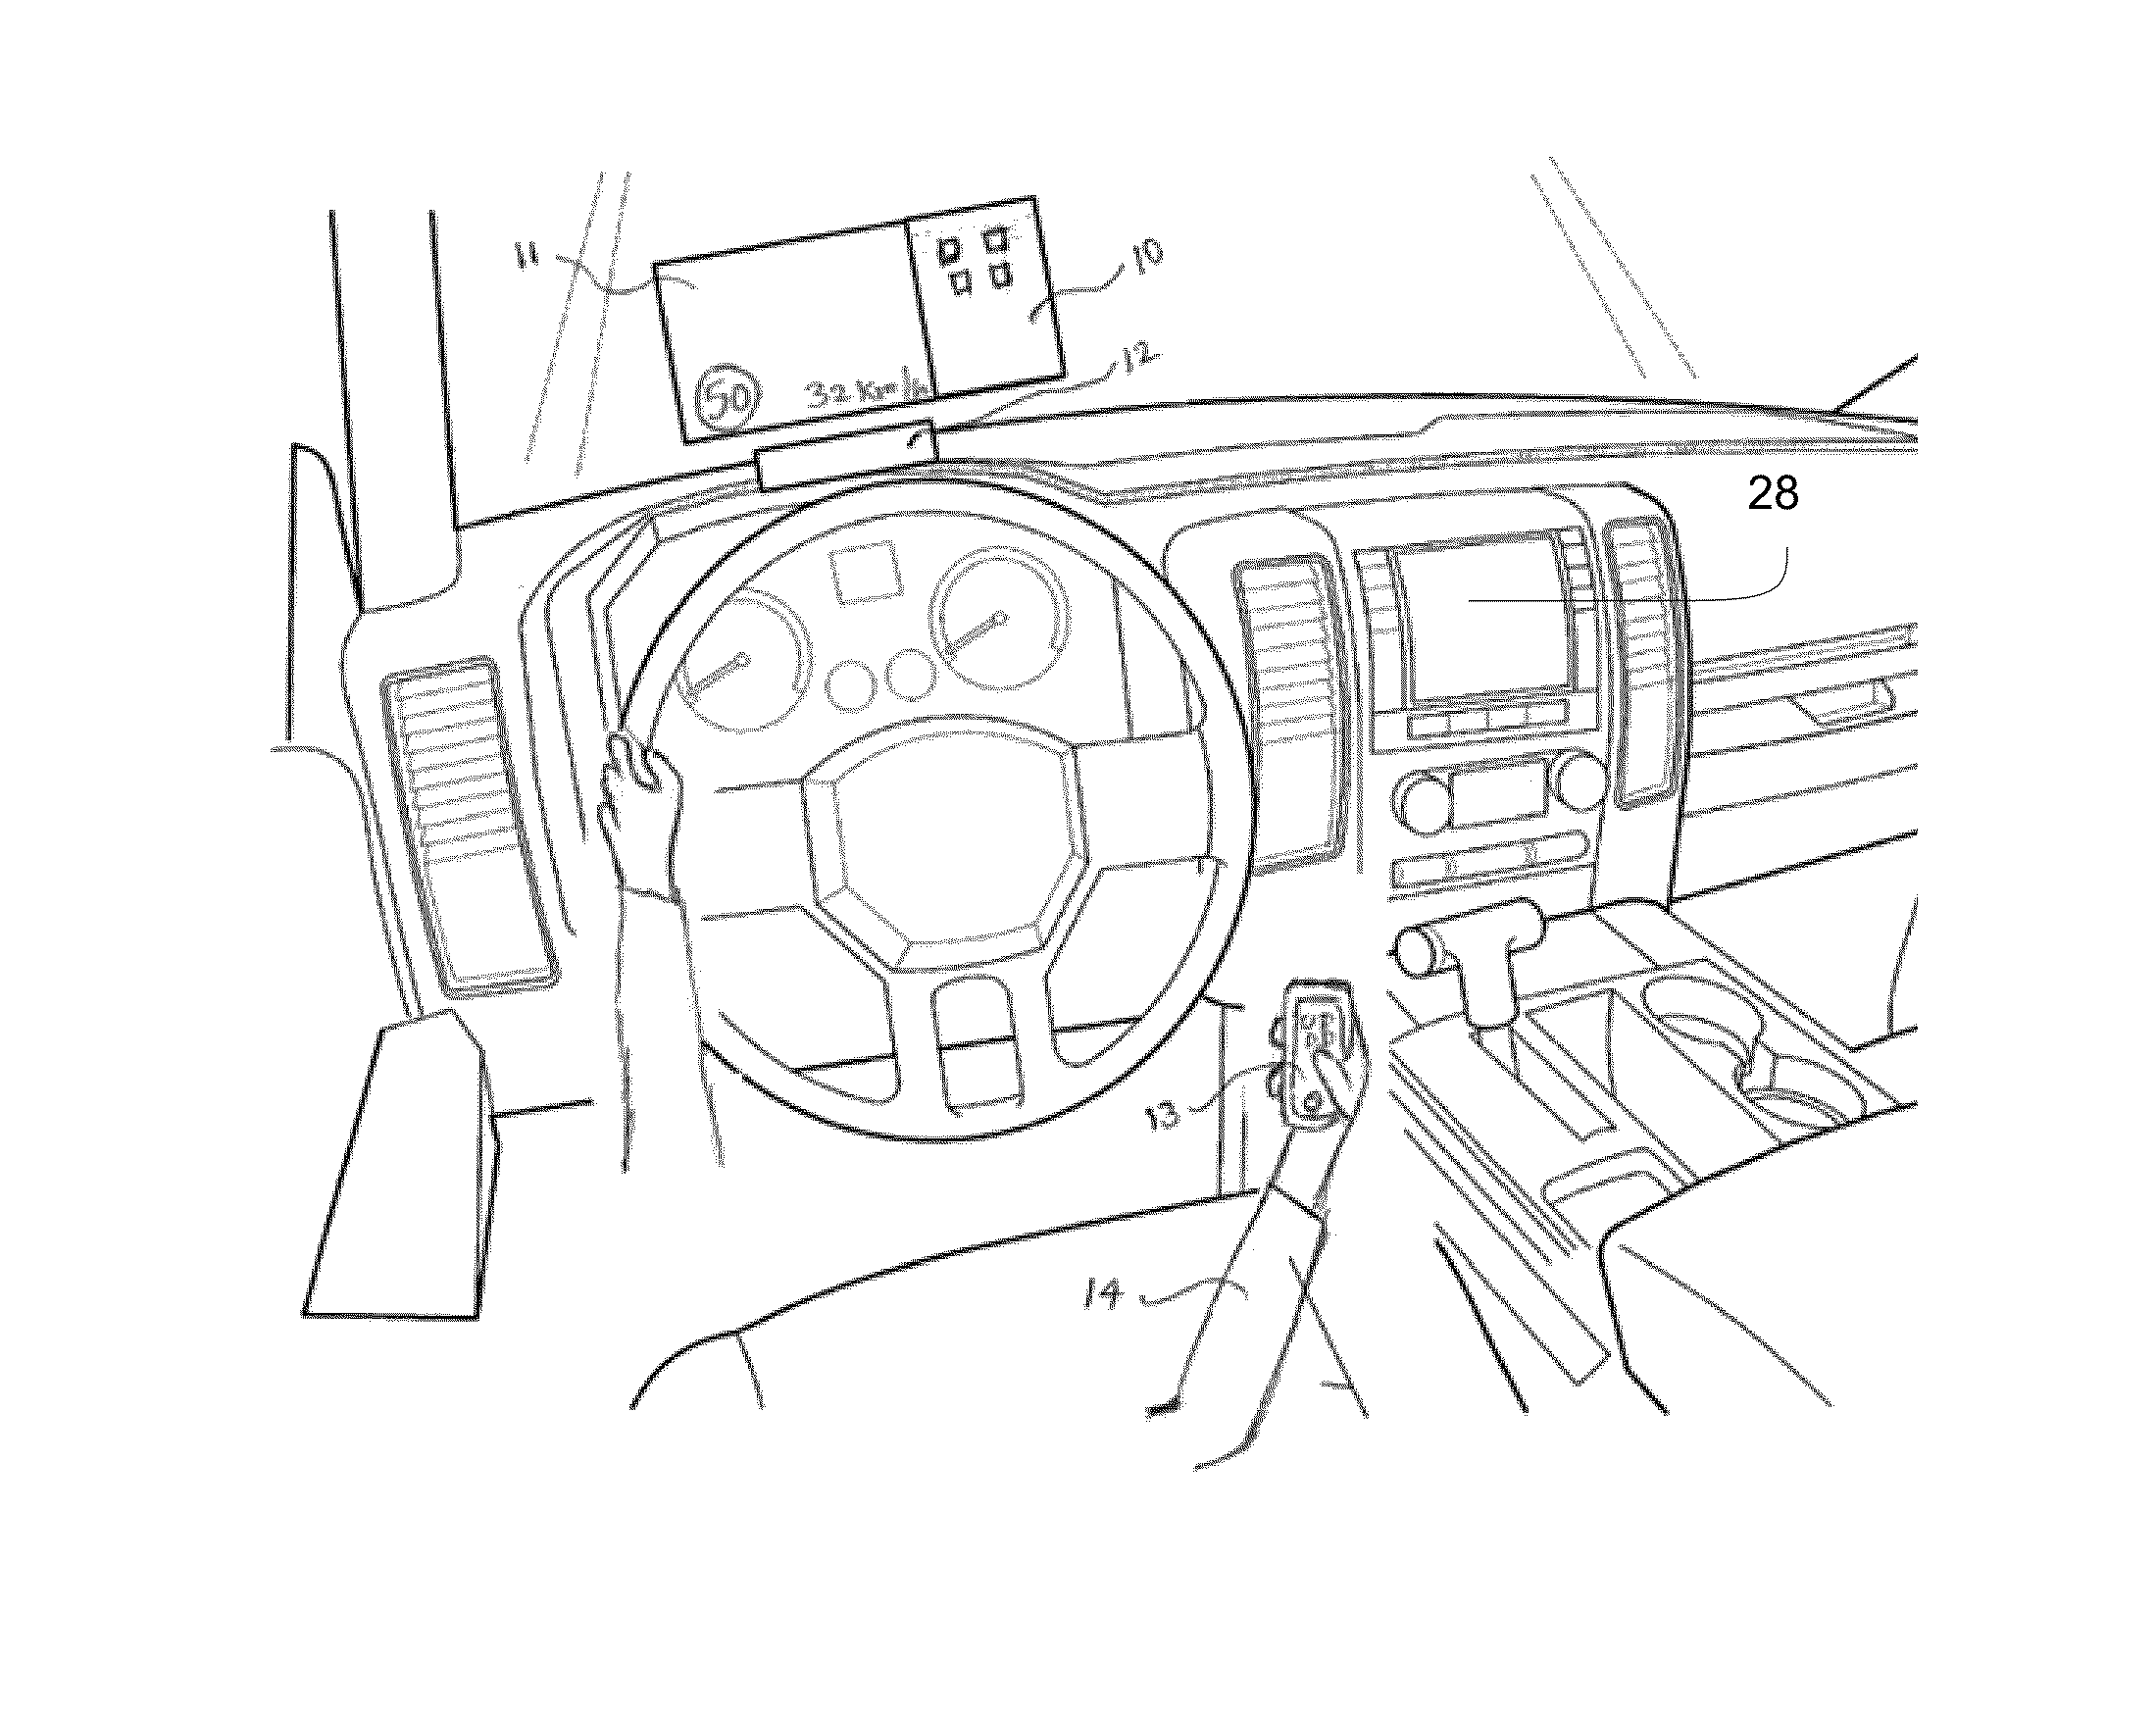 Vehicle control system with mobile device interface